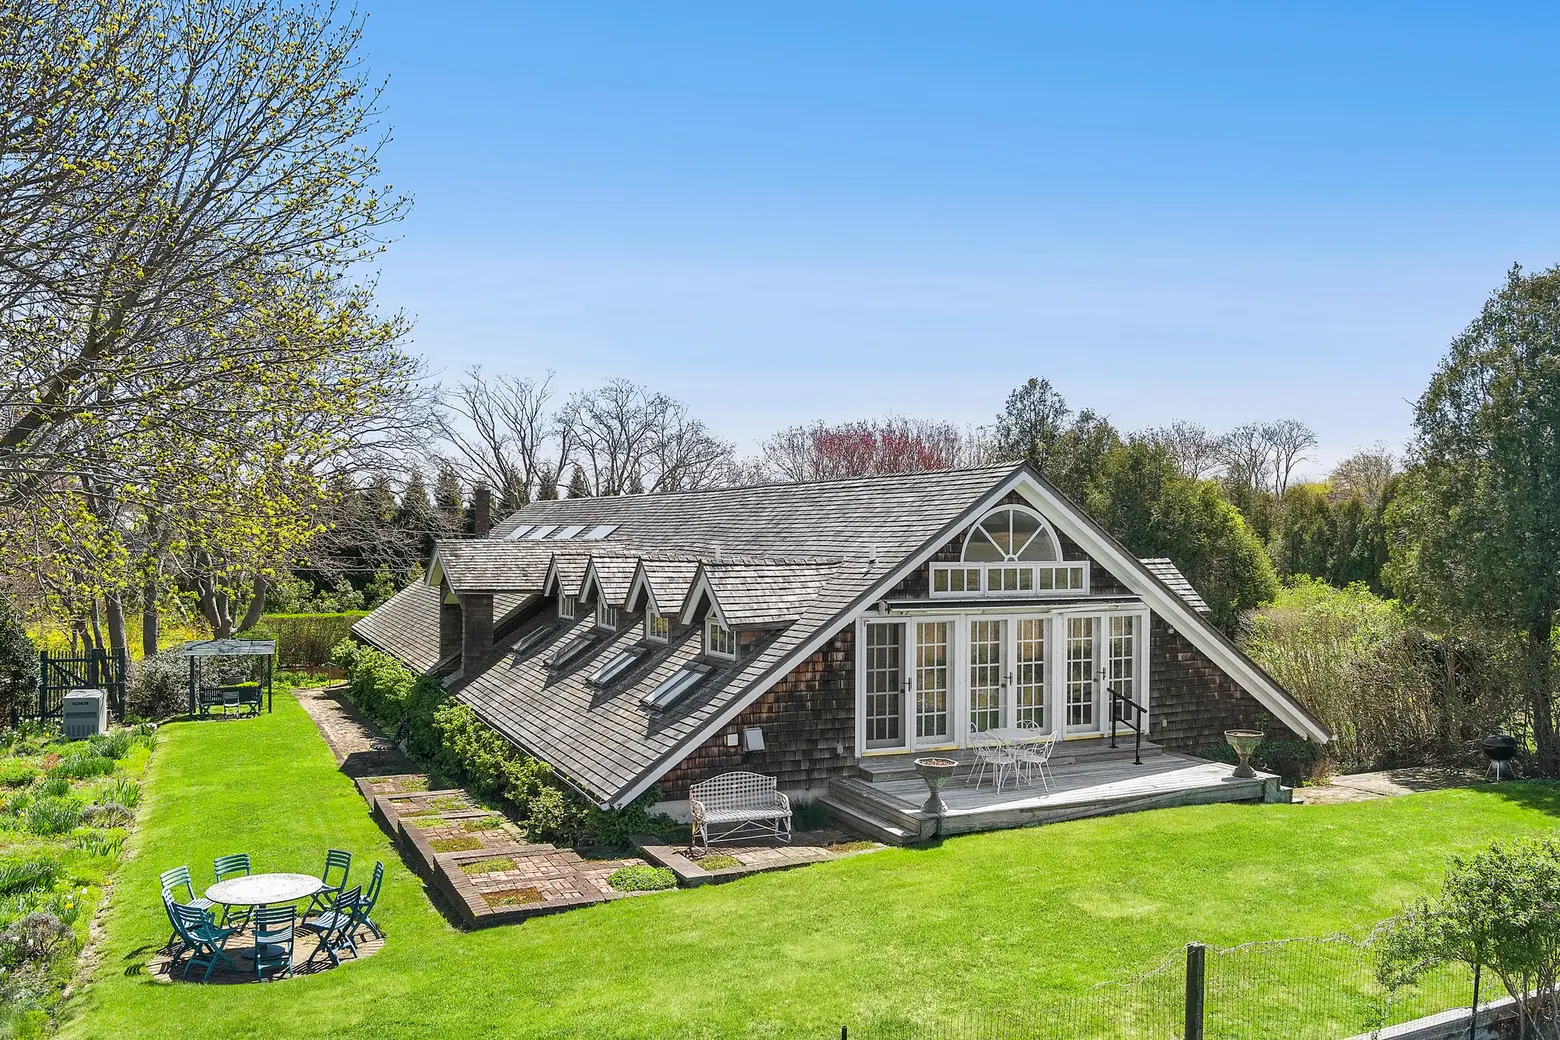 Asking $4.5M, this eclectic Bridgehampton home and artists’ studio was once a potato barn